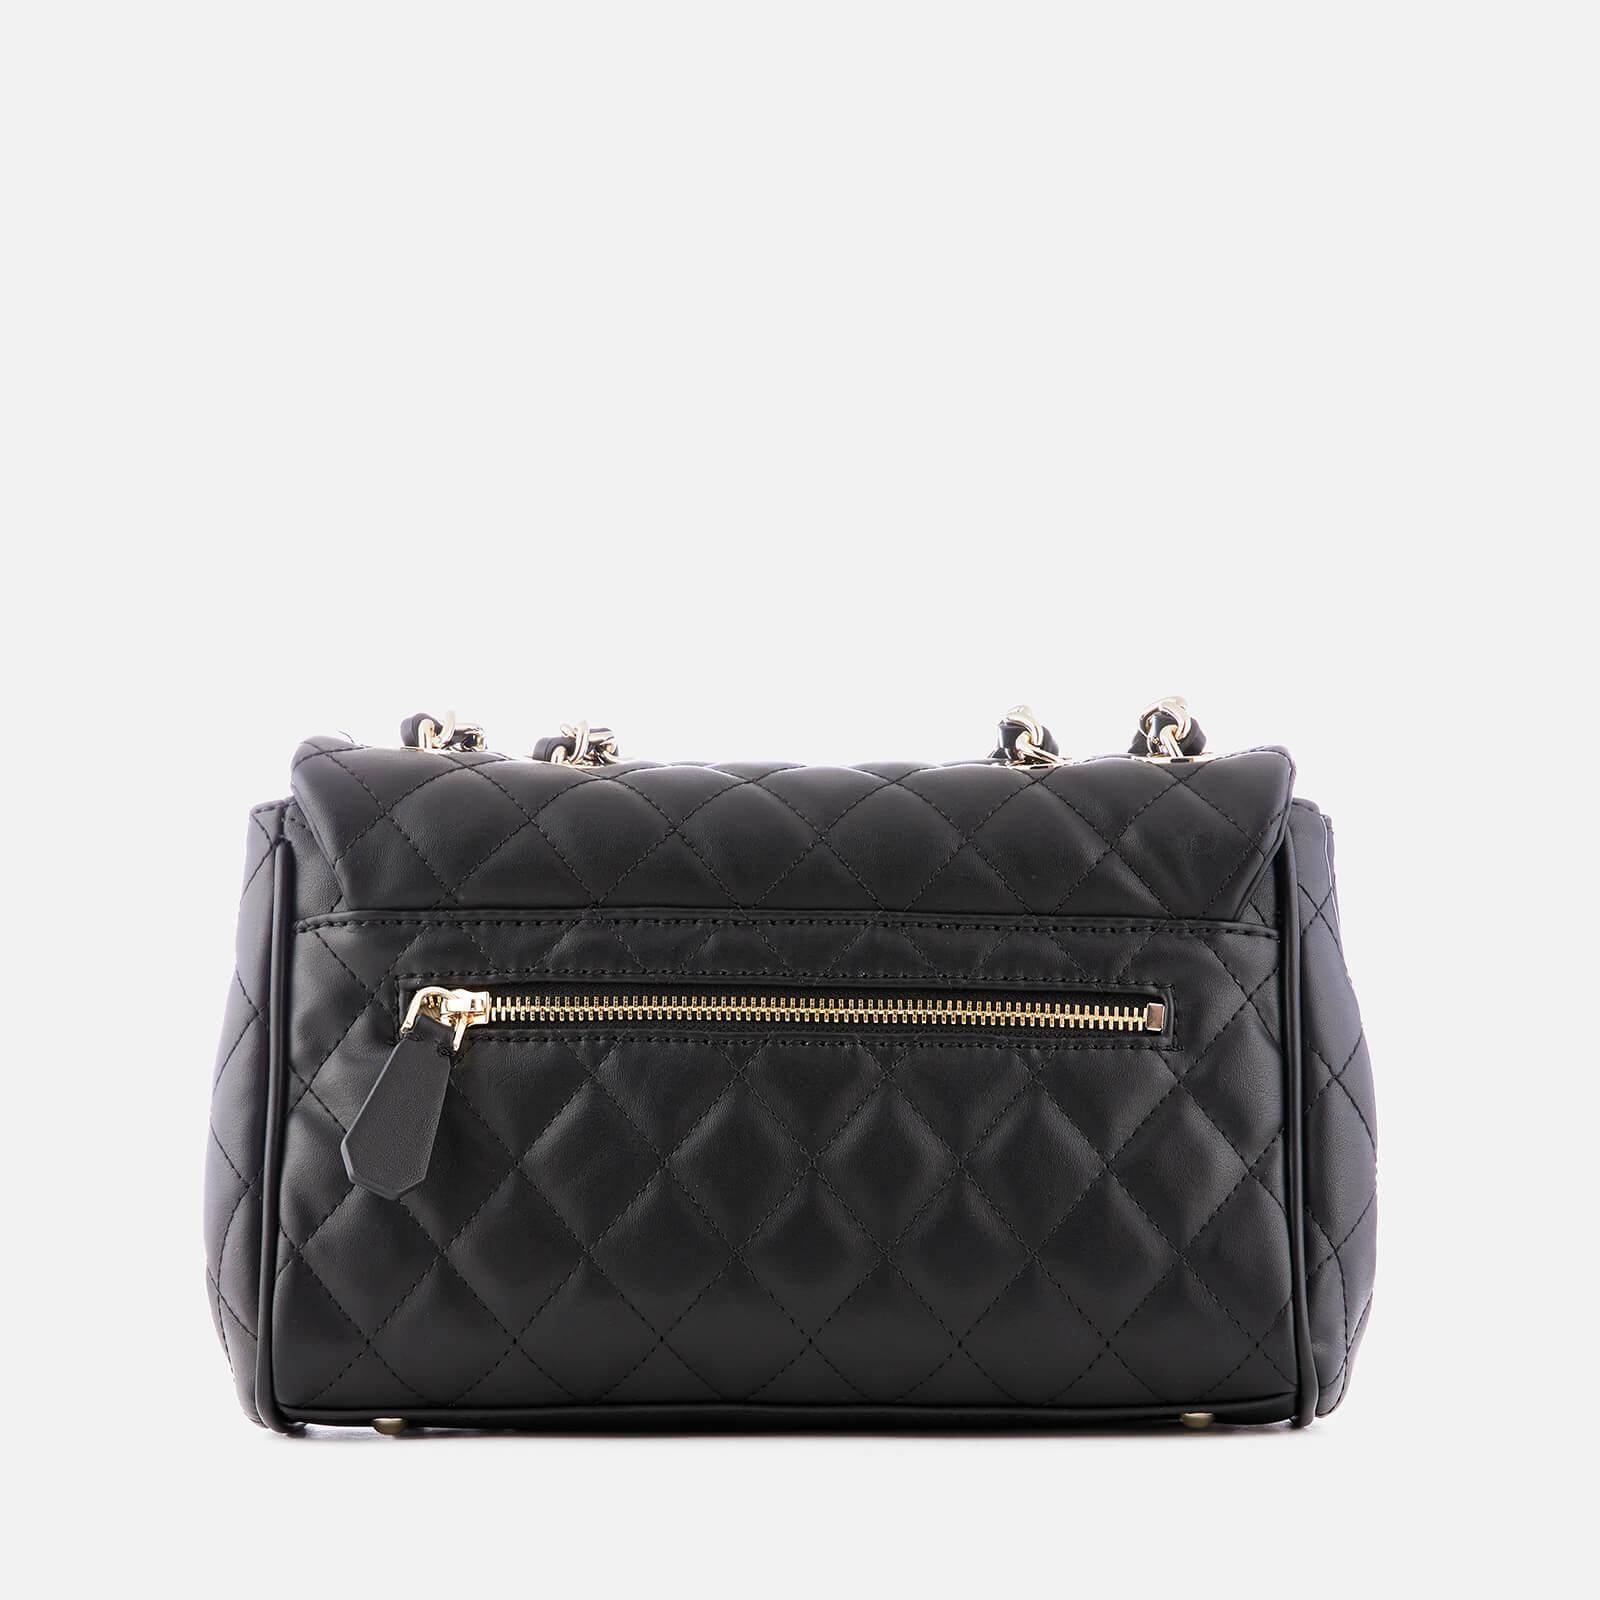 Guess Sweet Candy Convertible Cross Body Bag in Black | Lyst Australia